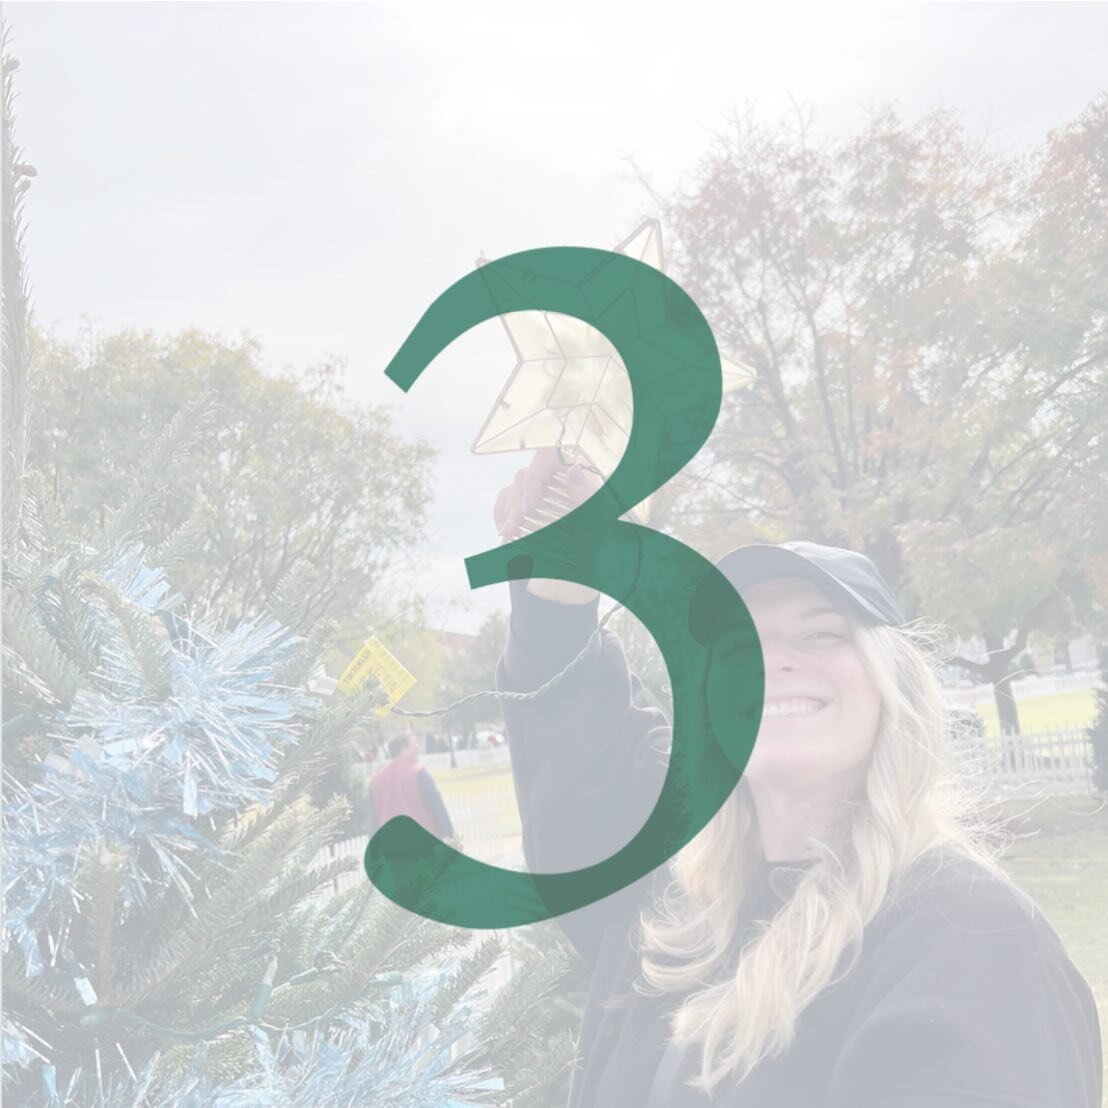 Only three more days until the Tinsel Trail opens! Bring your friends and family for a night of Christmas cheer. Make sure to stop by our tree to see how we got Charlie Brown #OffTheFloor this year! 

#sdallen #tinseltrail